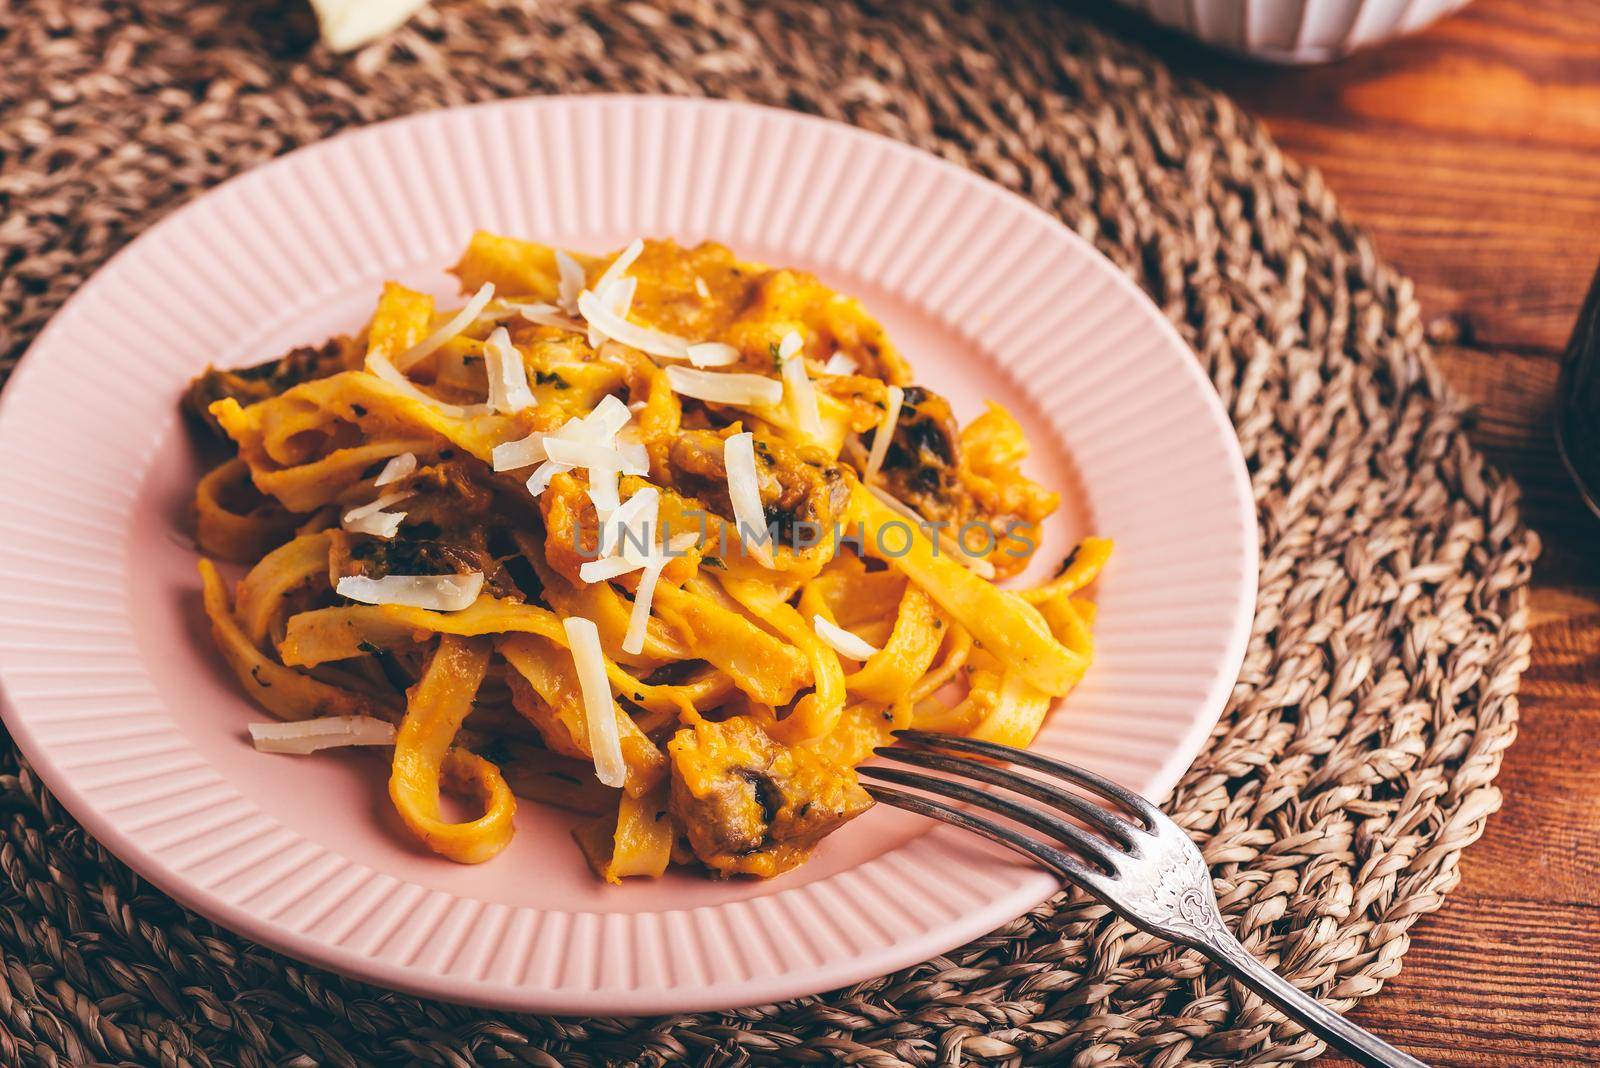 Tagliatelle Pasta with Creamy Pumpkin Sauce and Champignons Garnished with Grated Parmesan Cheese